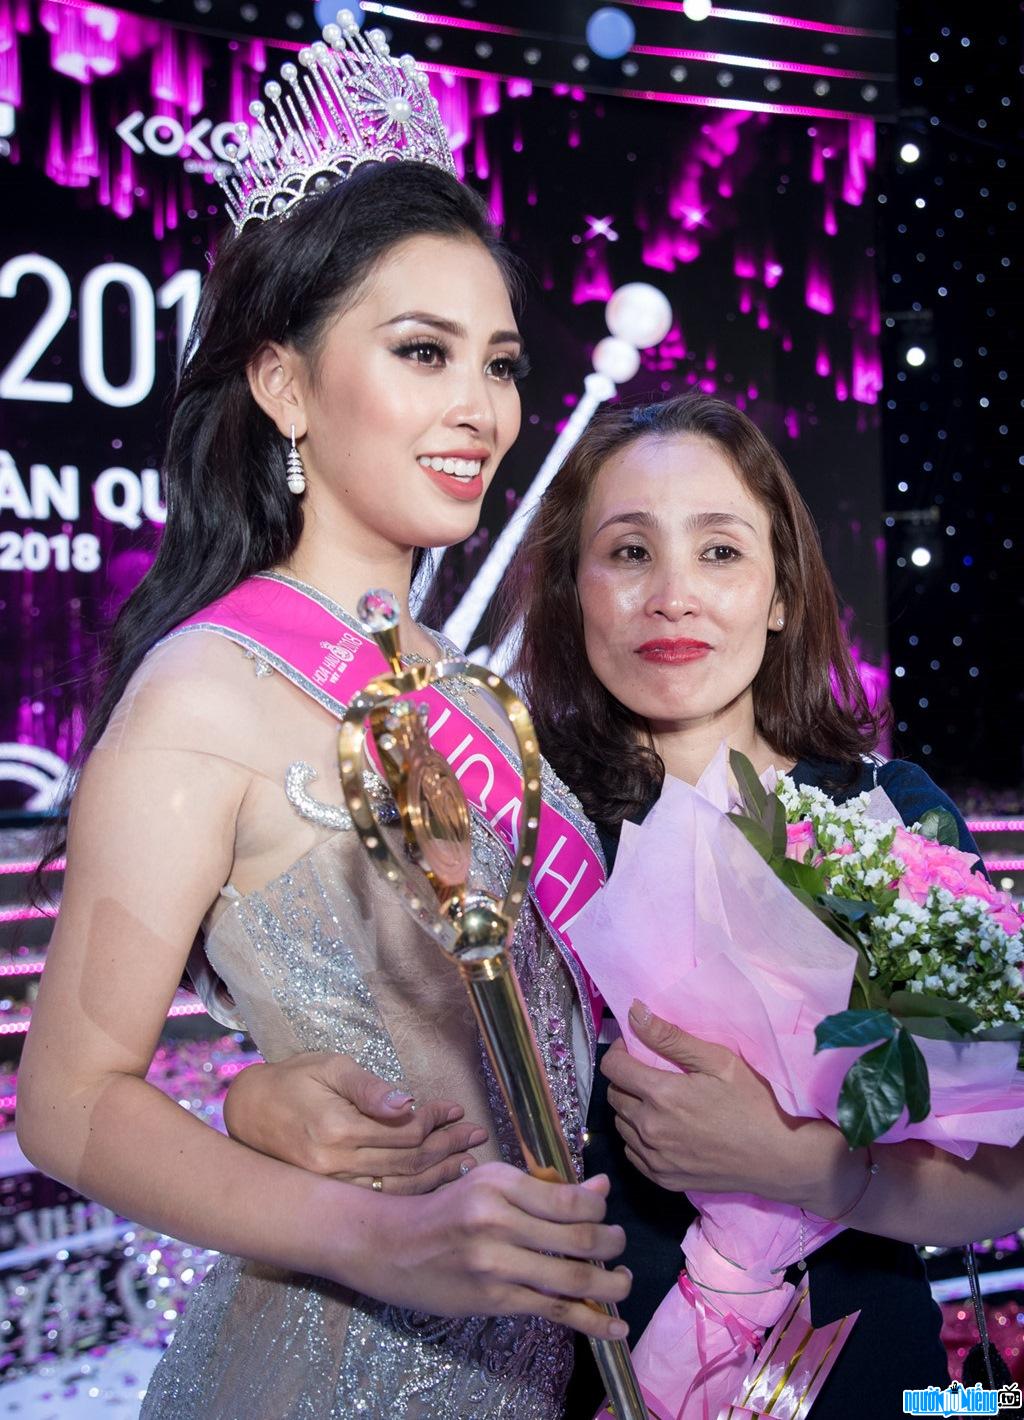  Photo of Miss Tran Tieu Vy and her mother after the moment of coronation